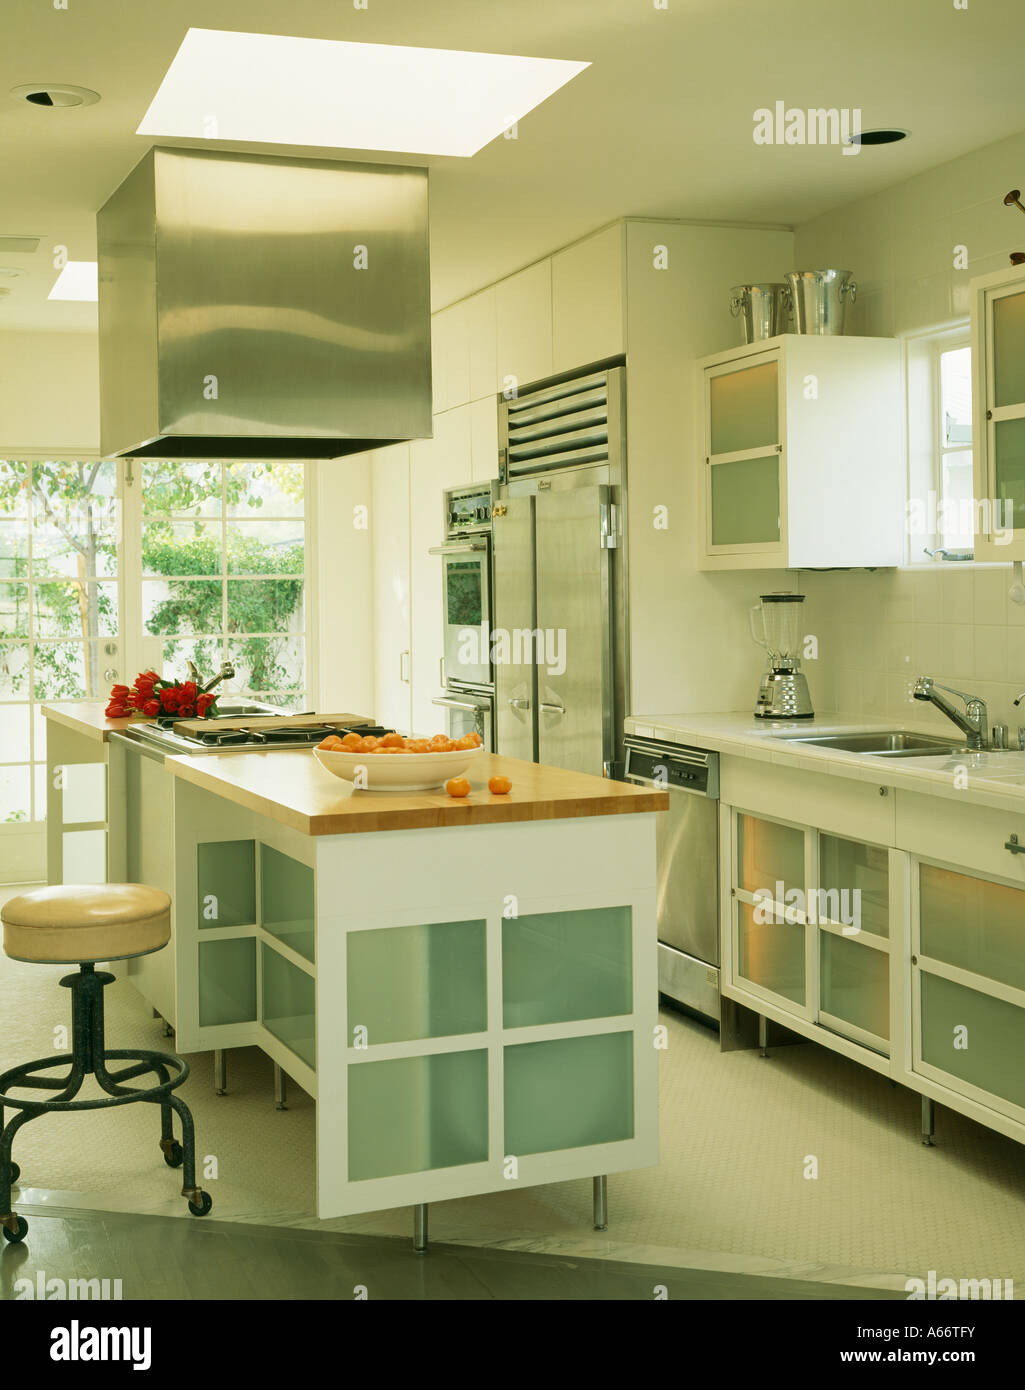 Modern White Kitchen With Island Unit And Opaque Glass Panels In